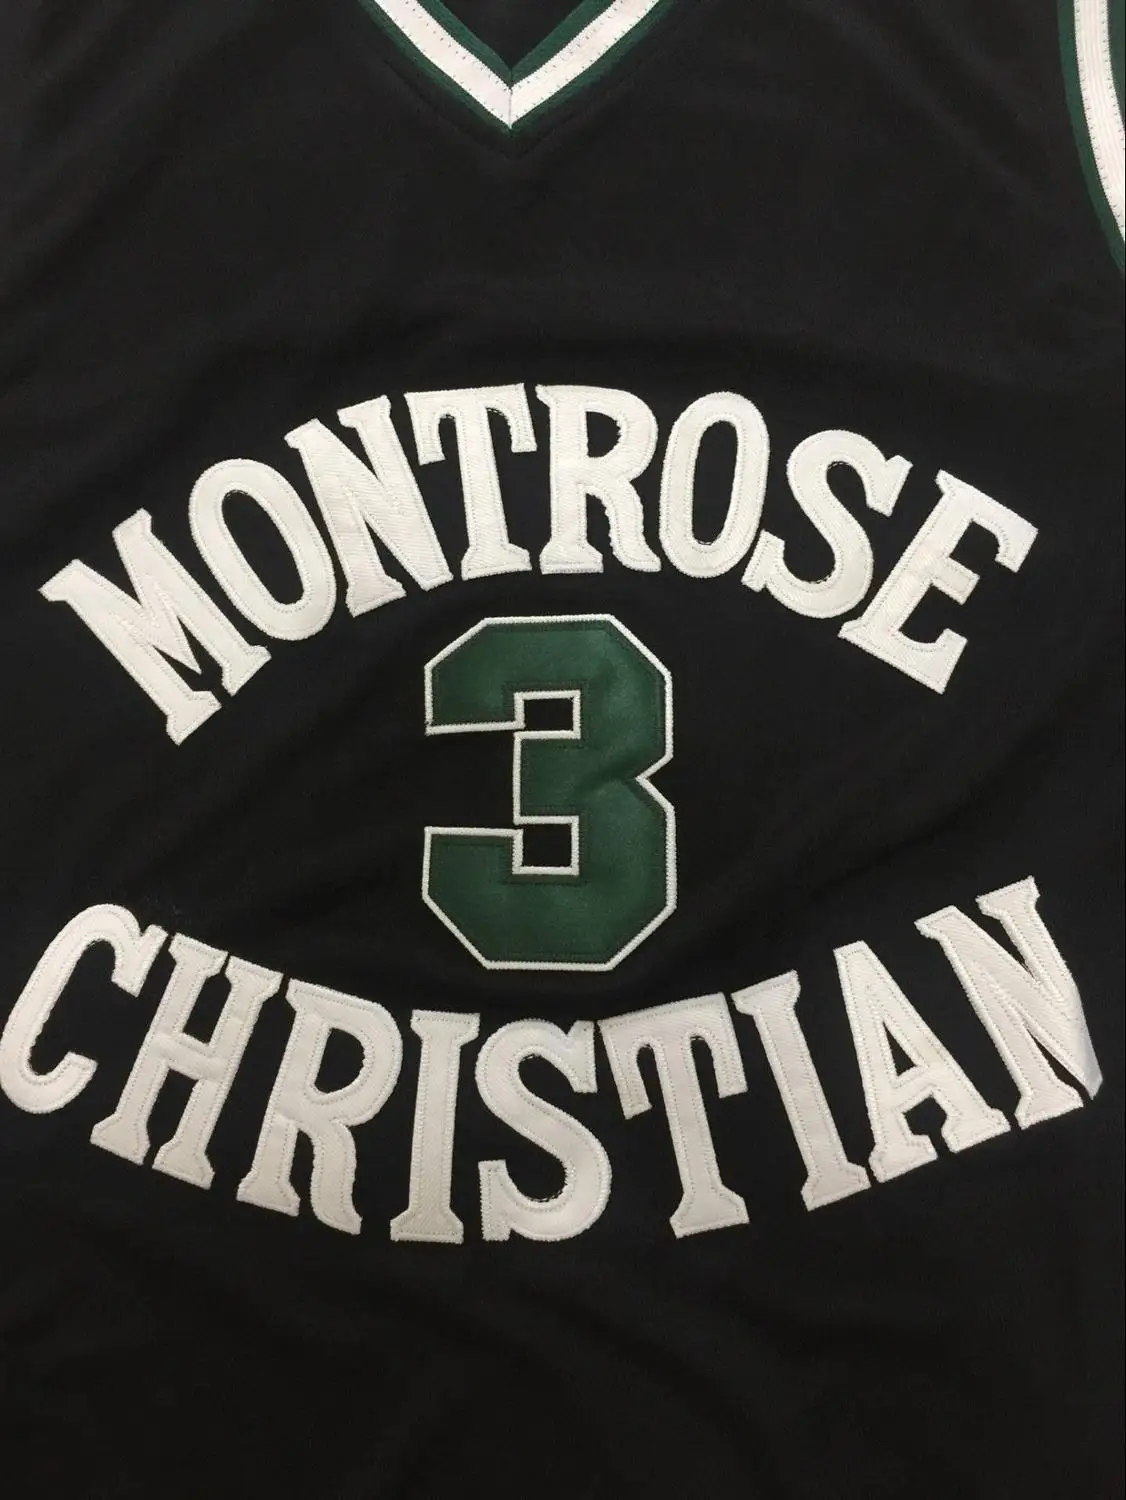 

Kevin DURANT #3 montrose christian High School Top Quality Basketball Jersey Mens Stitched Custom Any Number Name